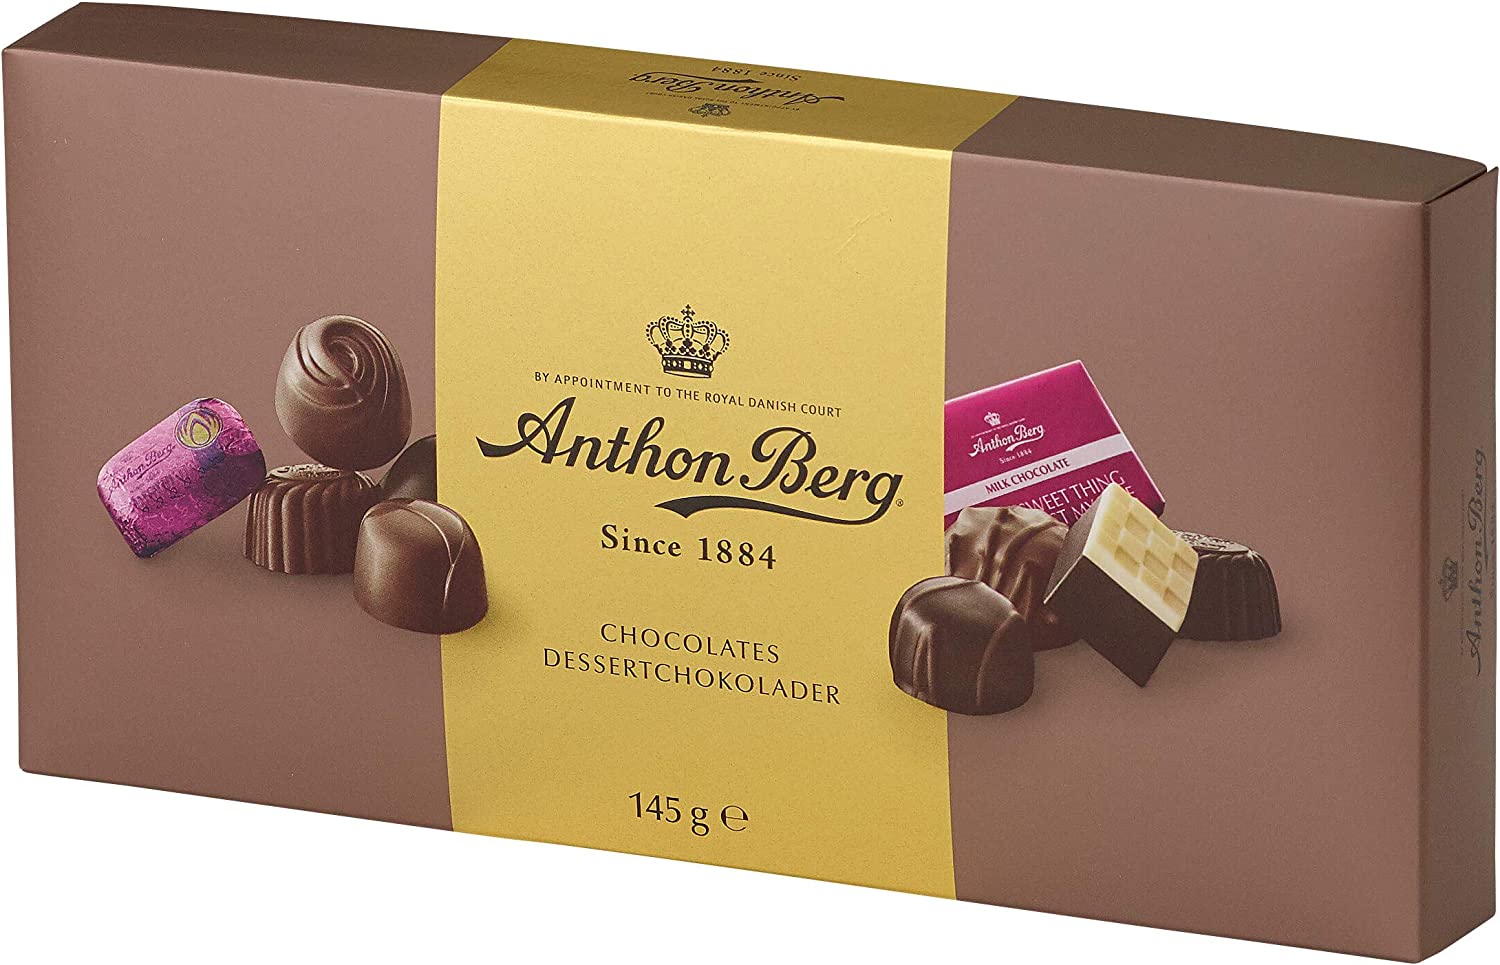 An Anthon Berg Favourites Box 145g in a brown box.